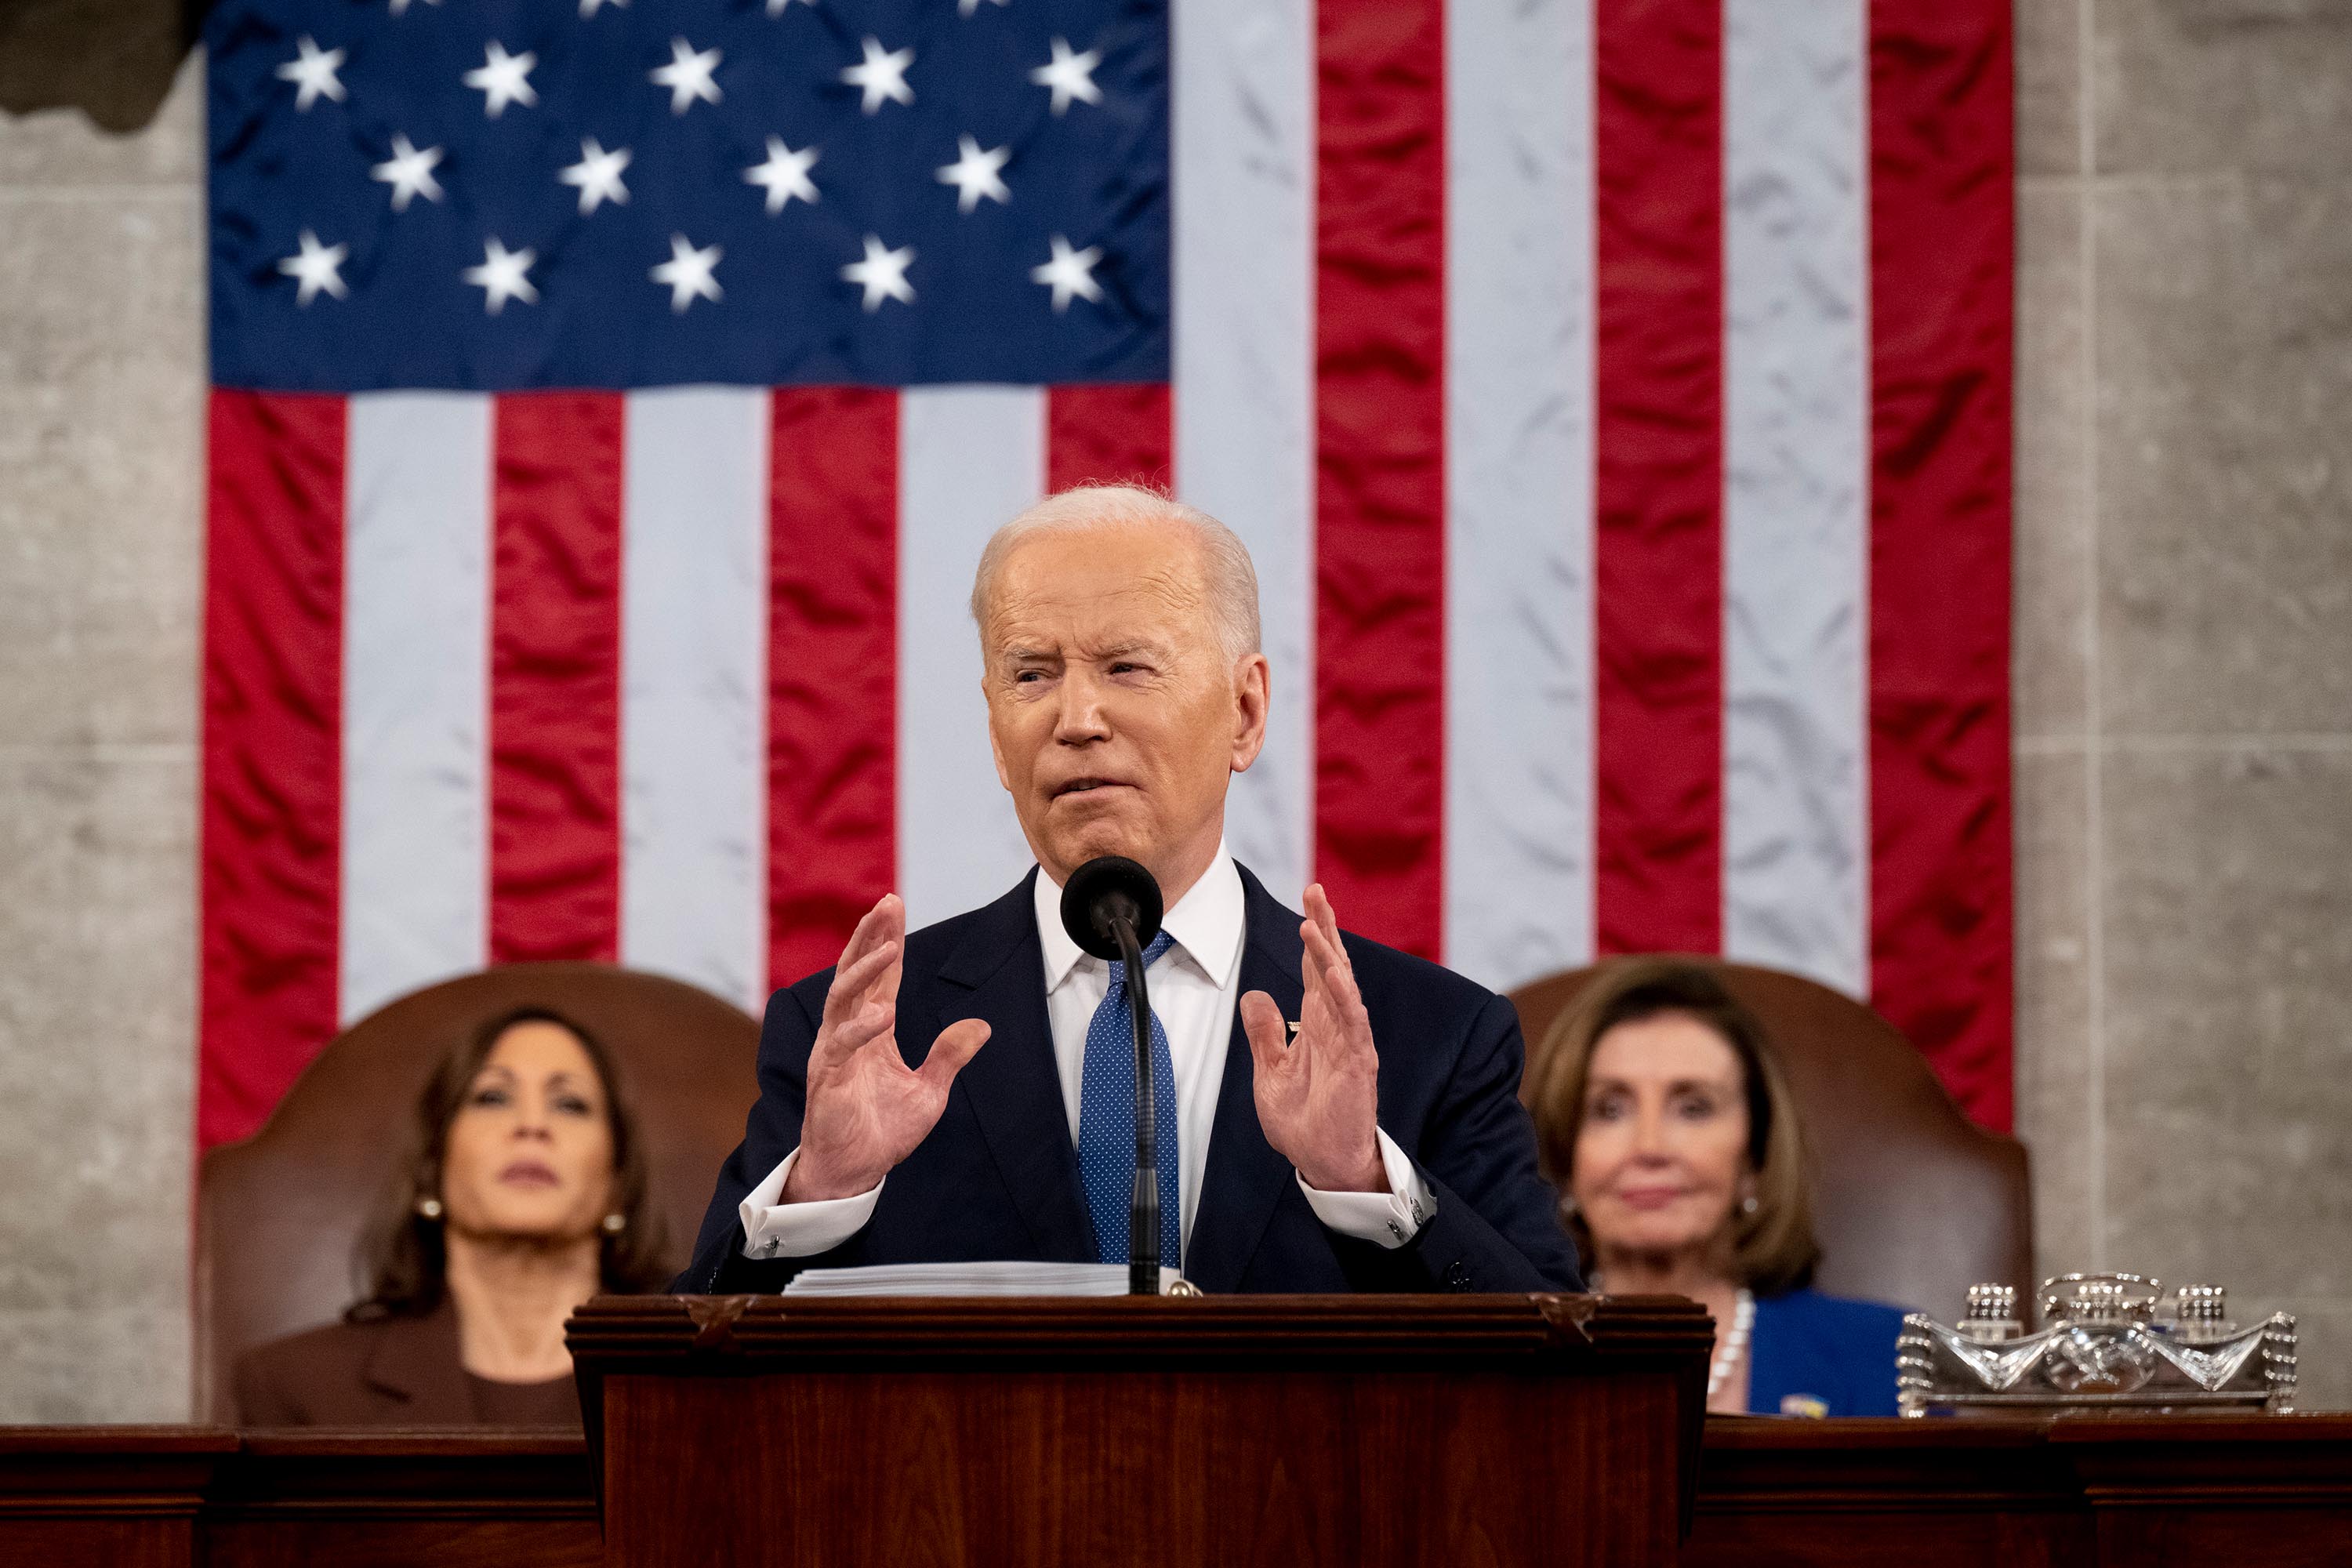 Biden calls for a “reset” to “stop seeing Covid as a partisan dividing line”